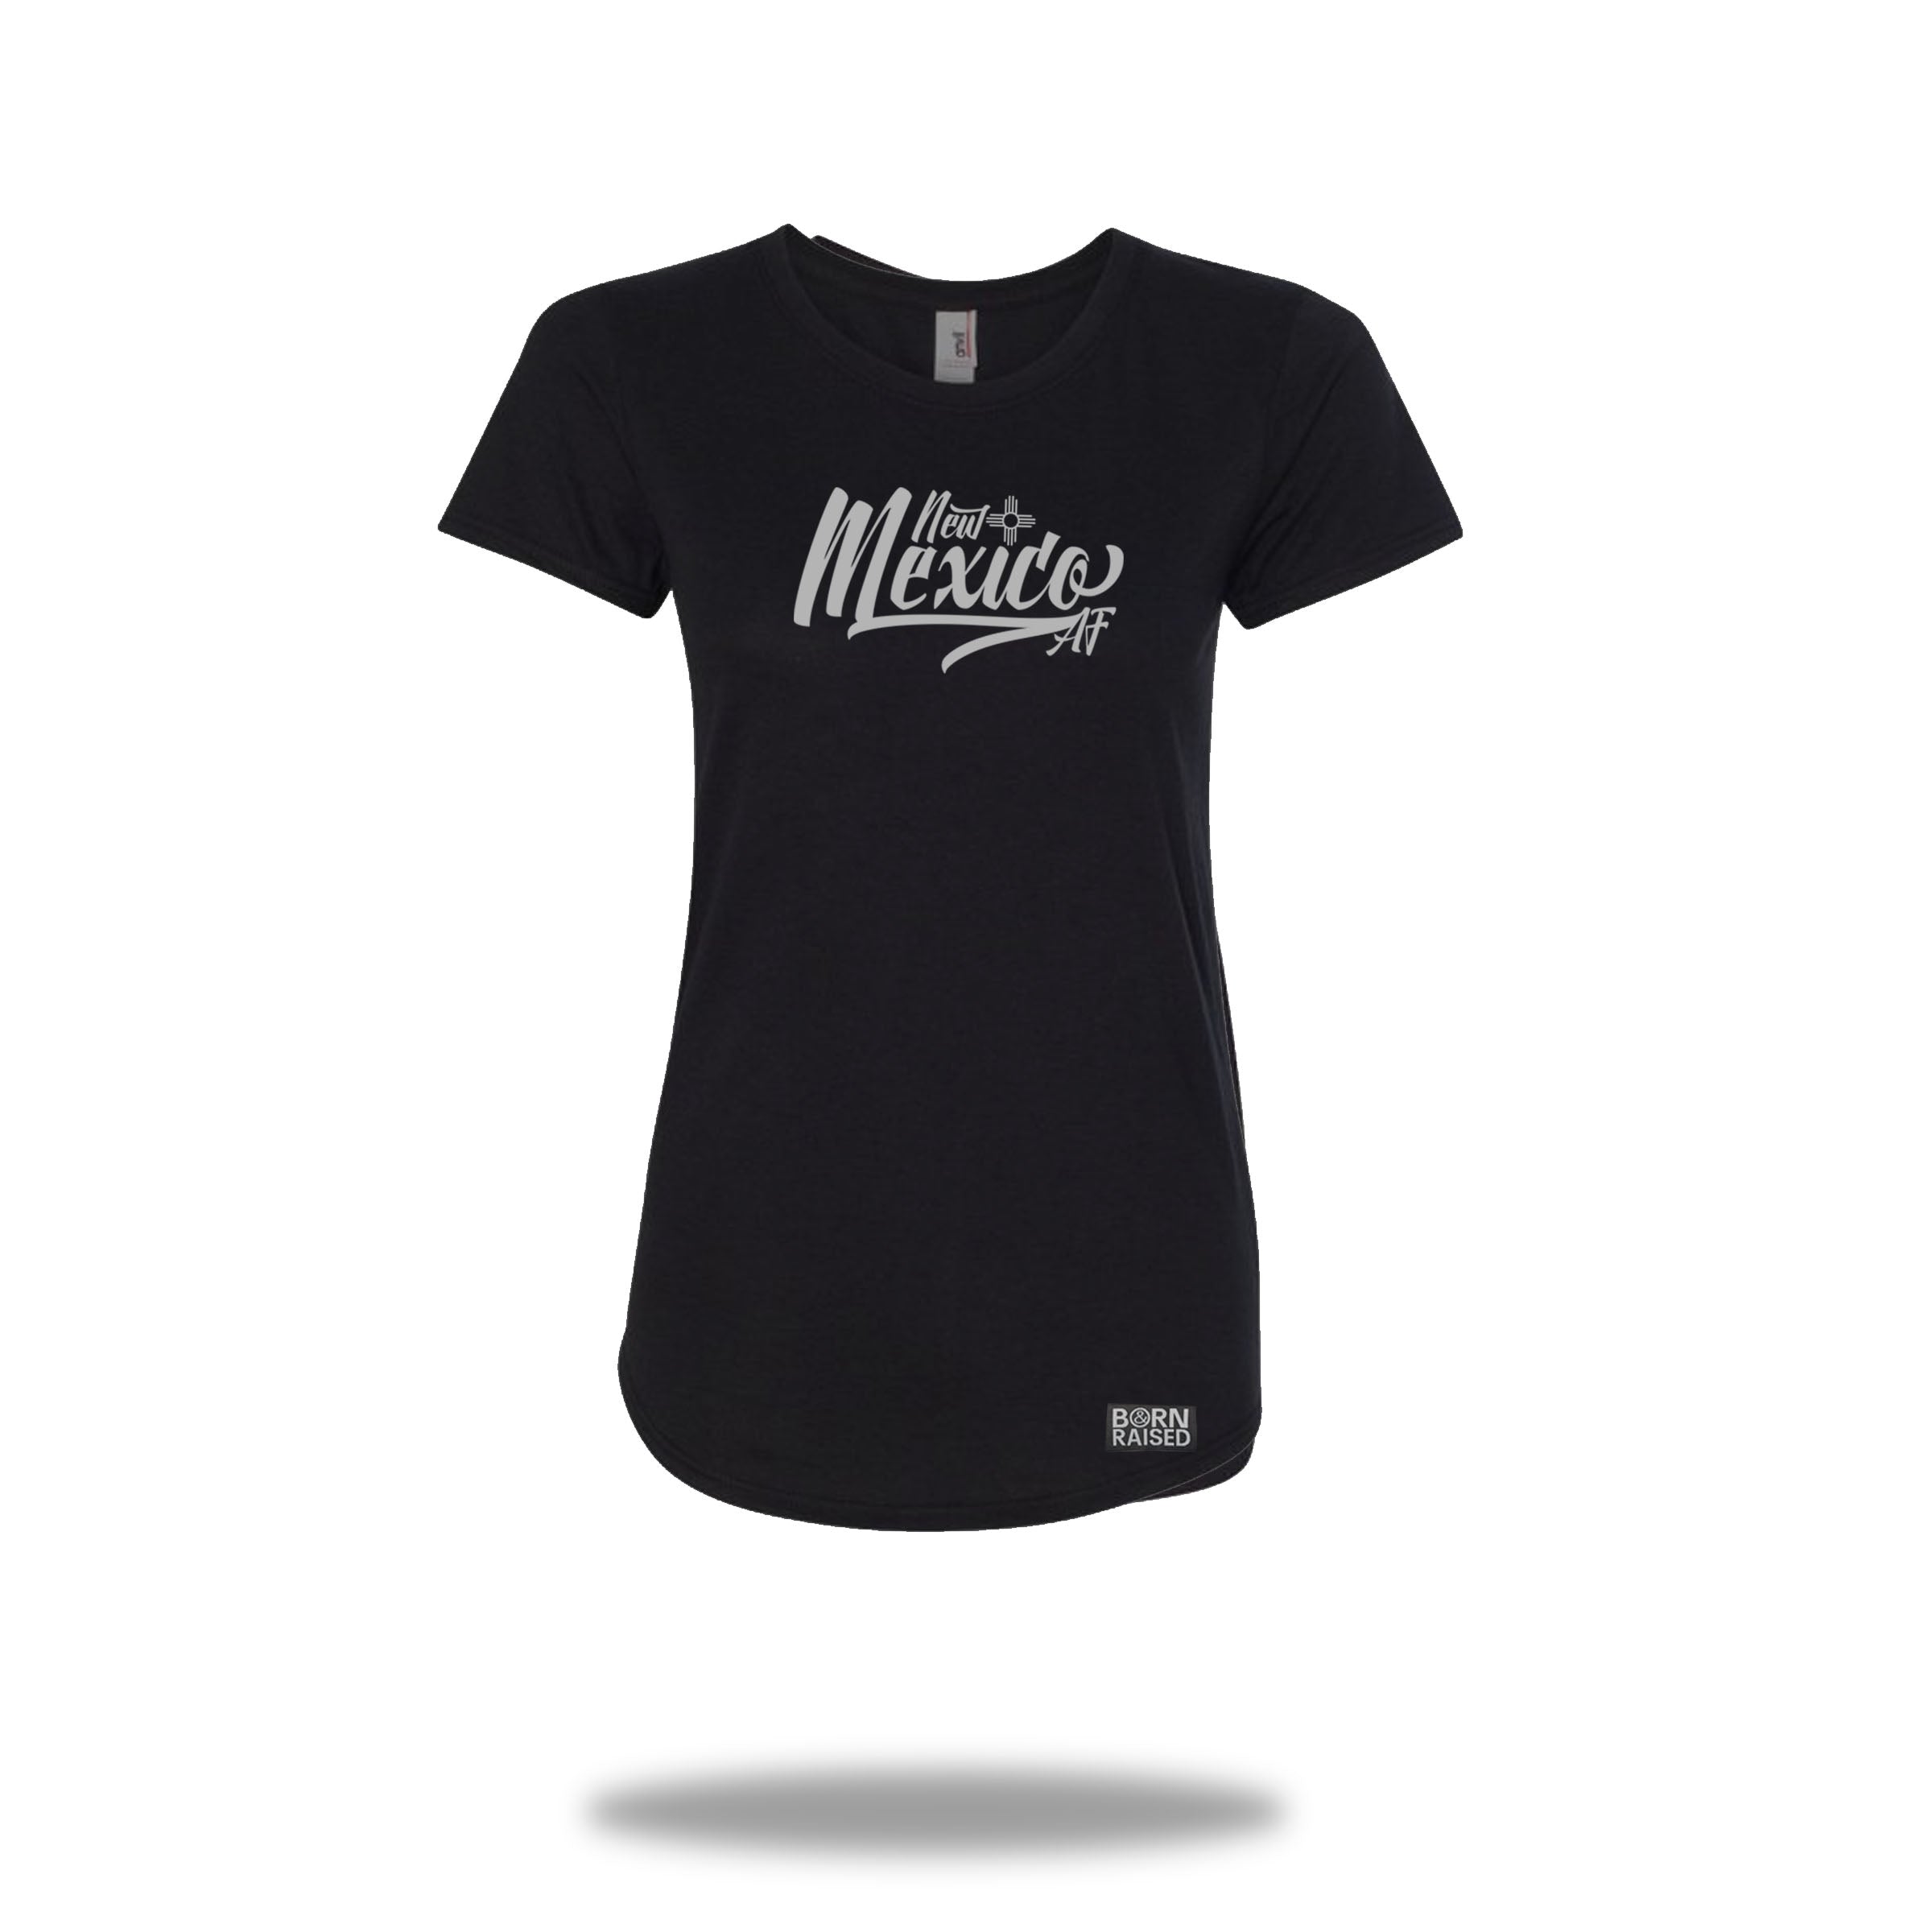 Ladies' New Mexico AF T-Shirt